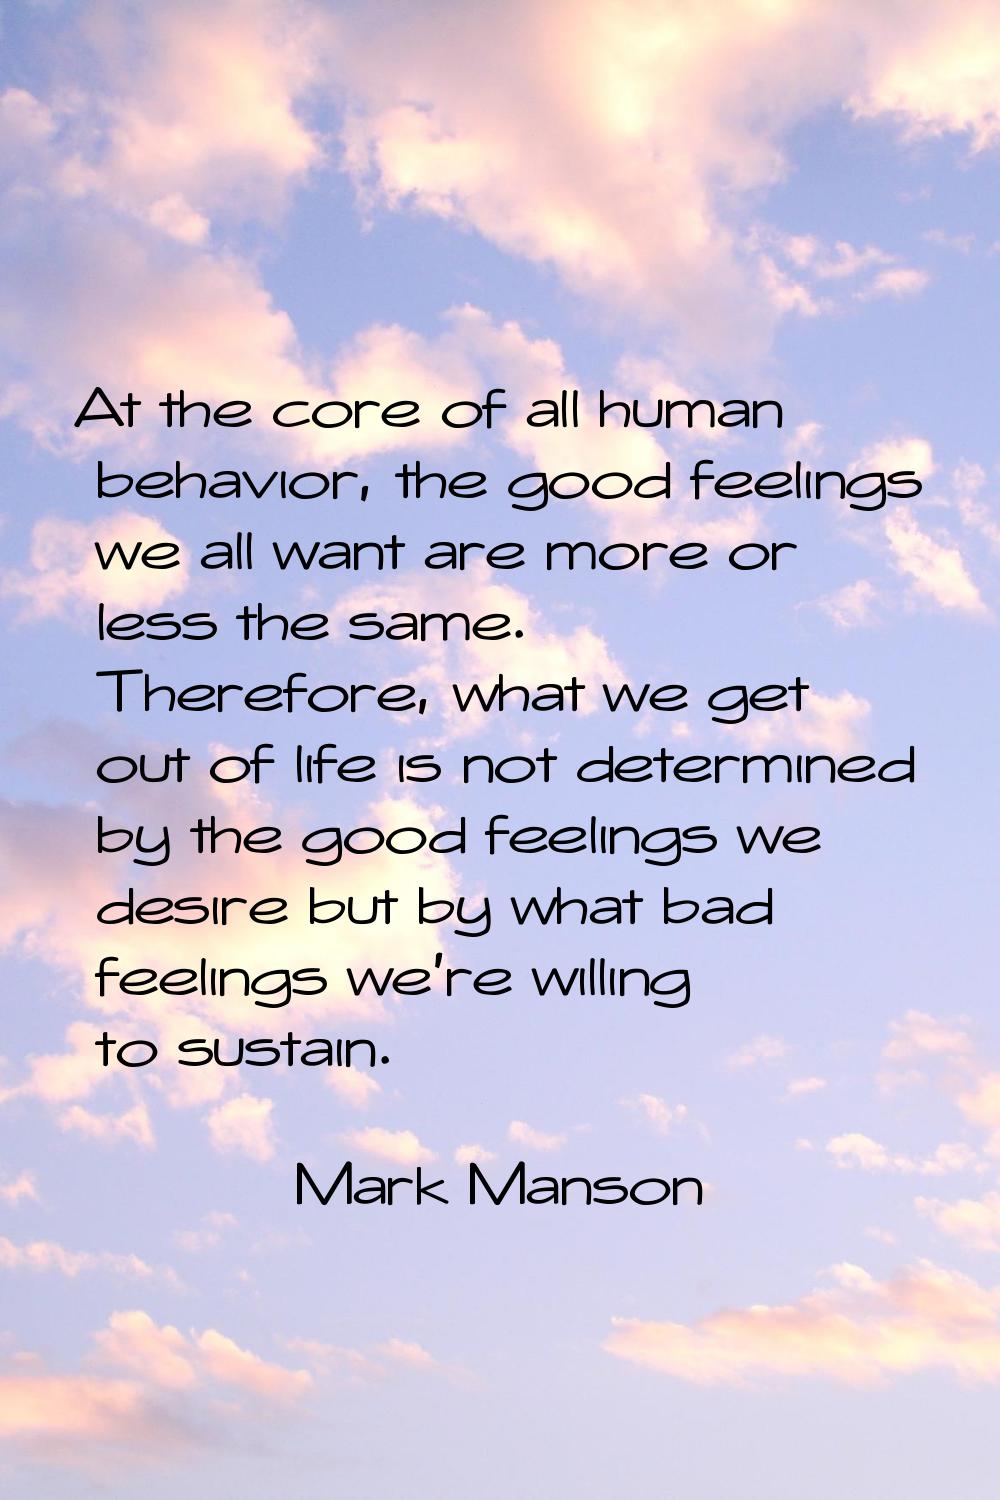 At the core of all human behavior, the good feelings we all want are more or less the same. Therefo